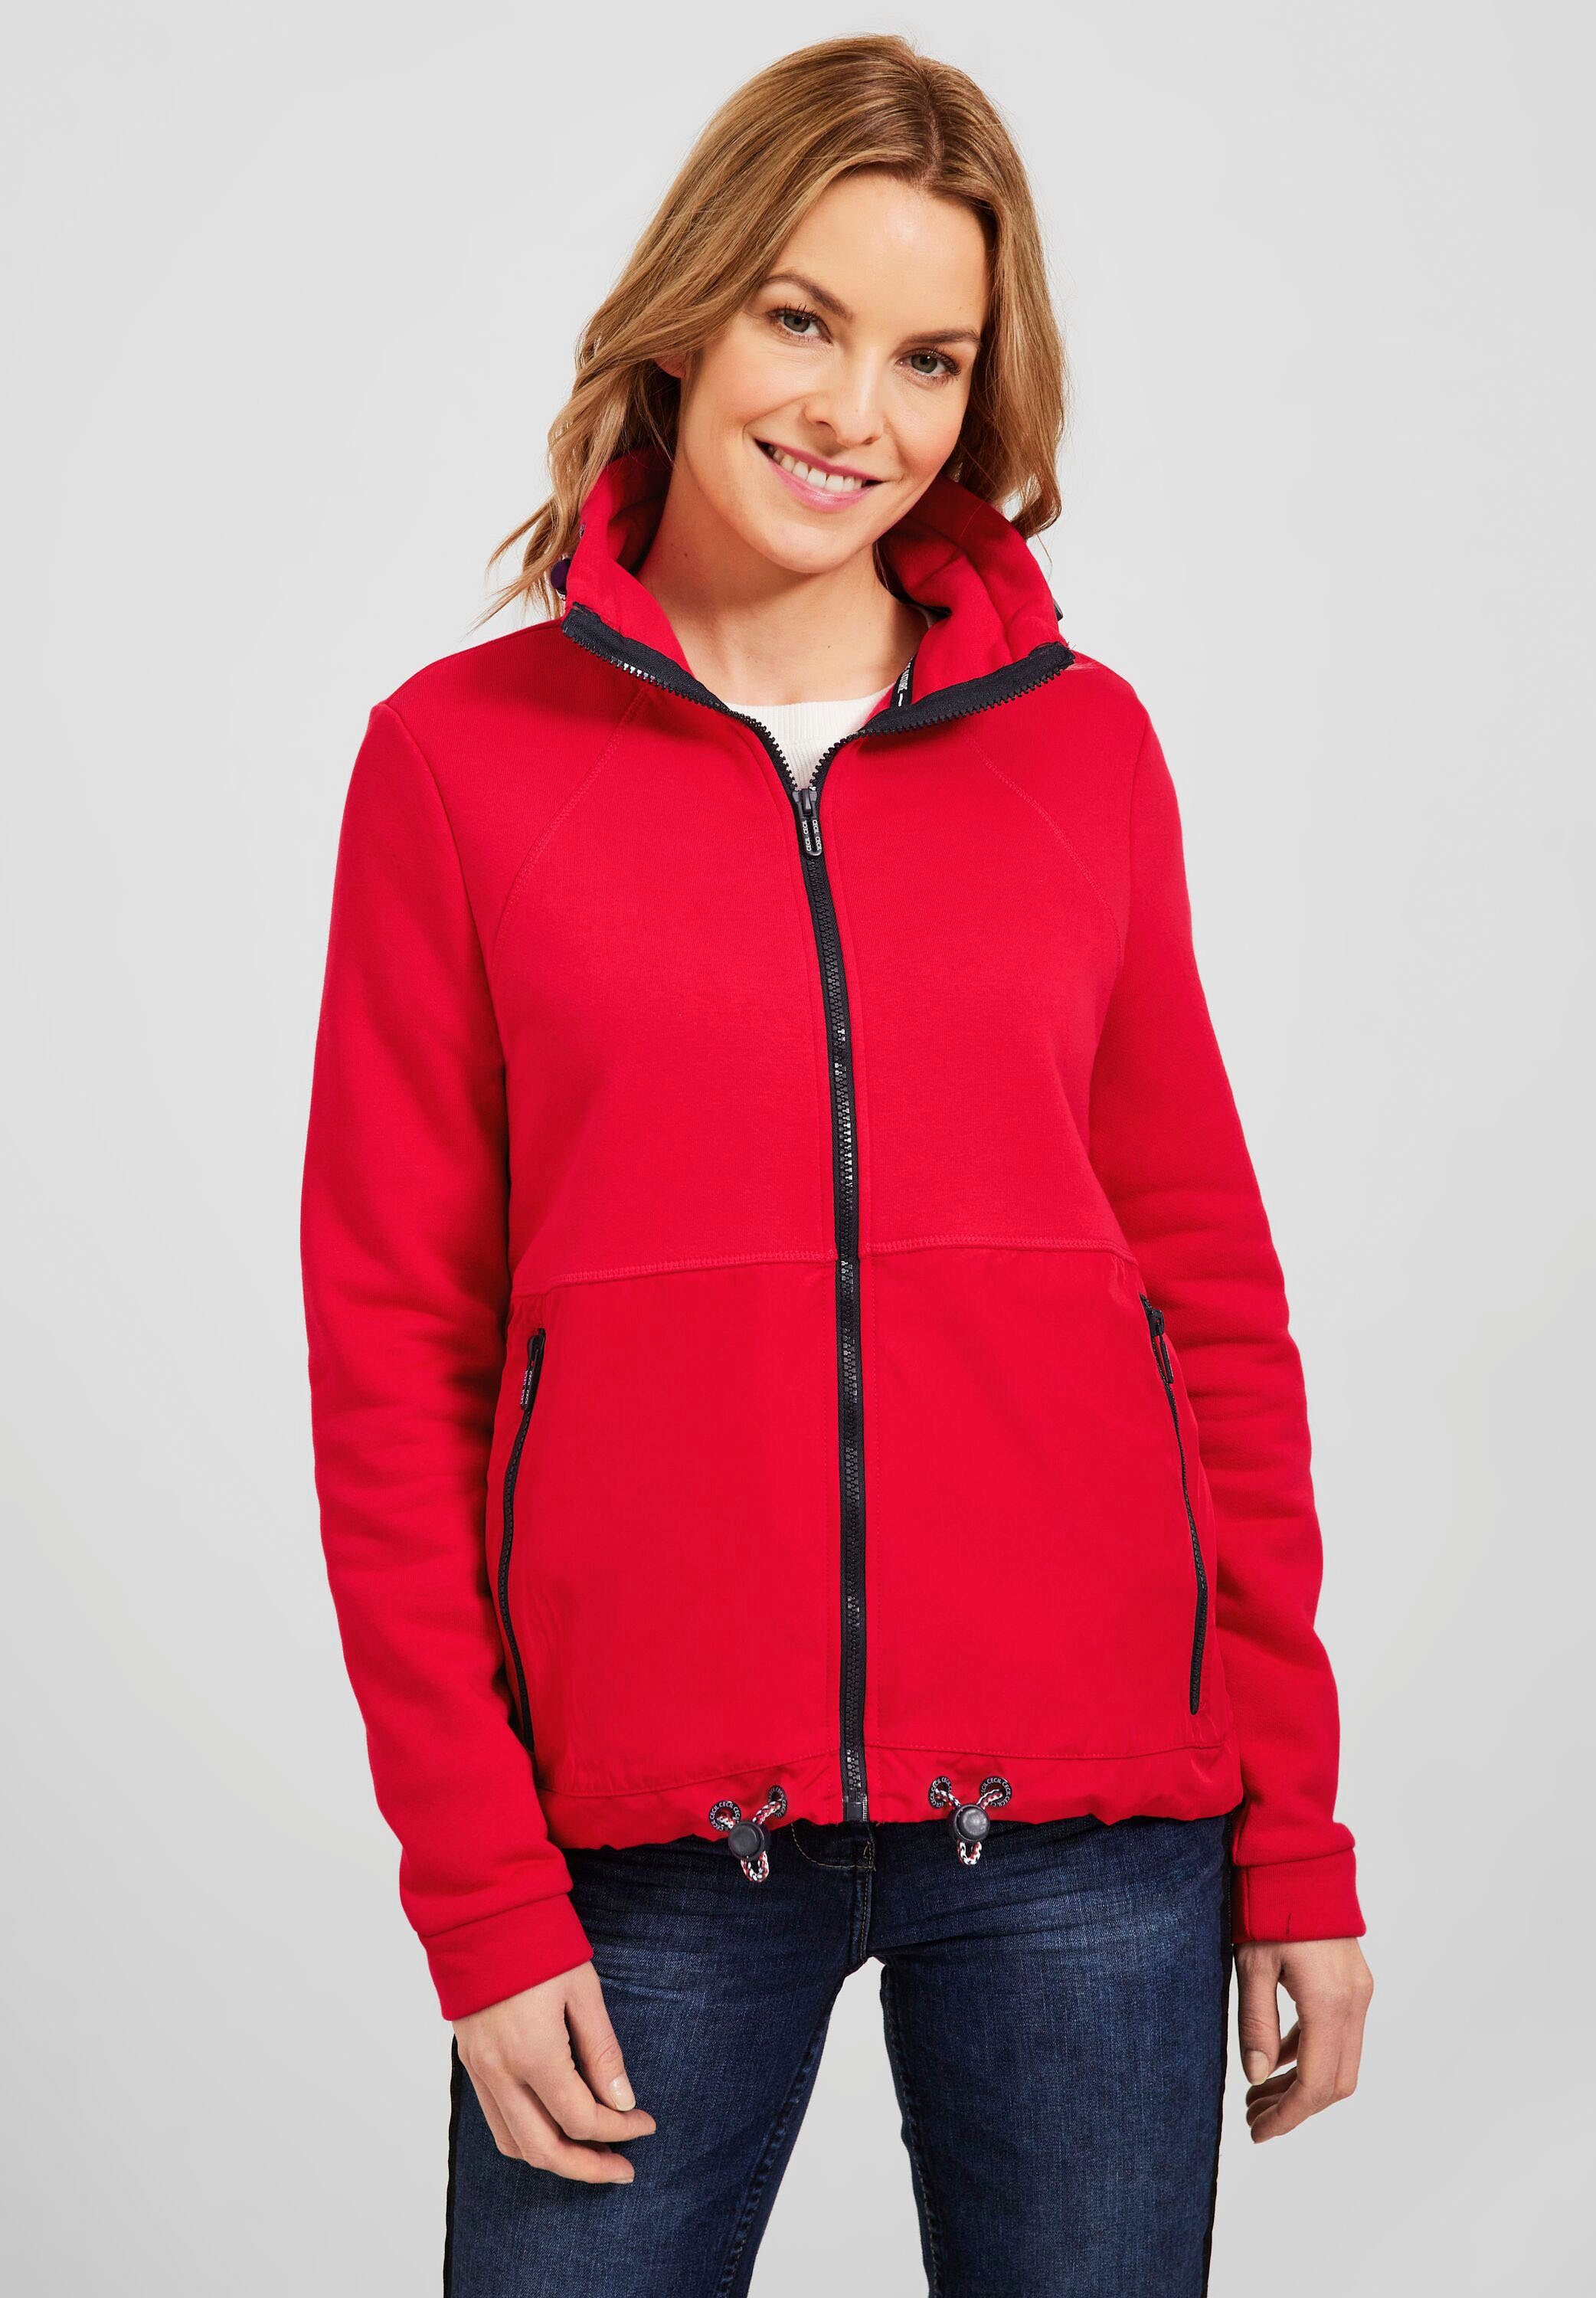 modernen strong im red Cecil Materialmix Sweatjacke